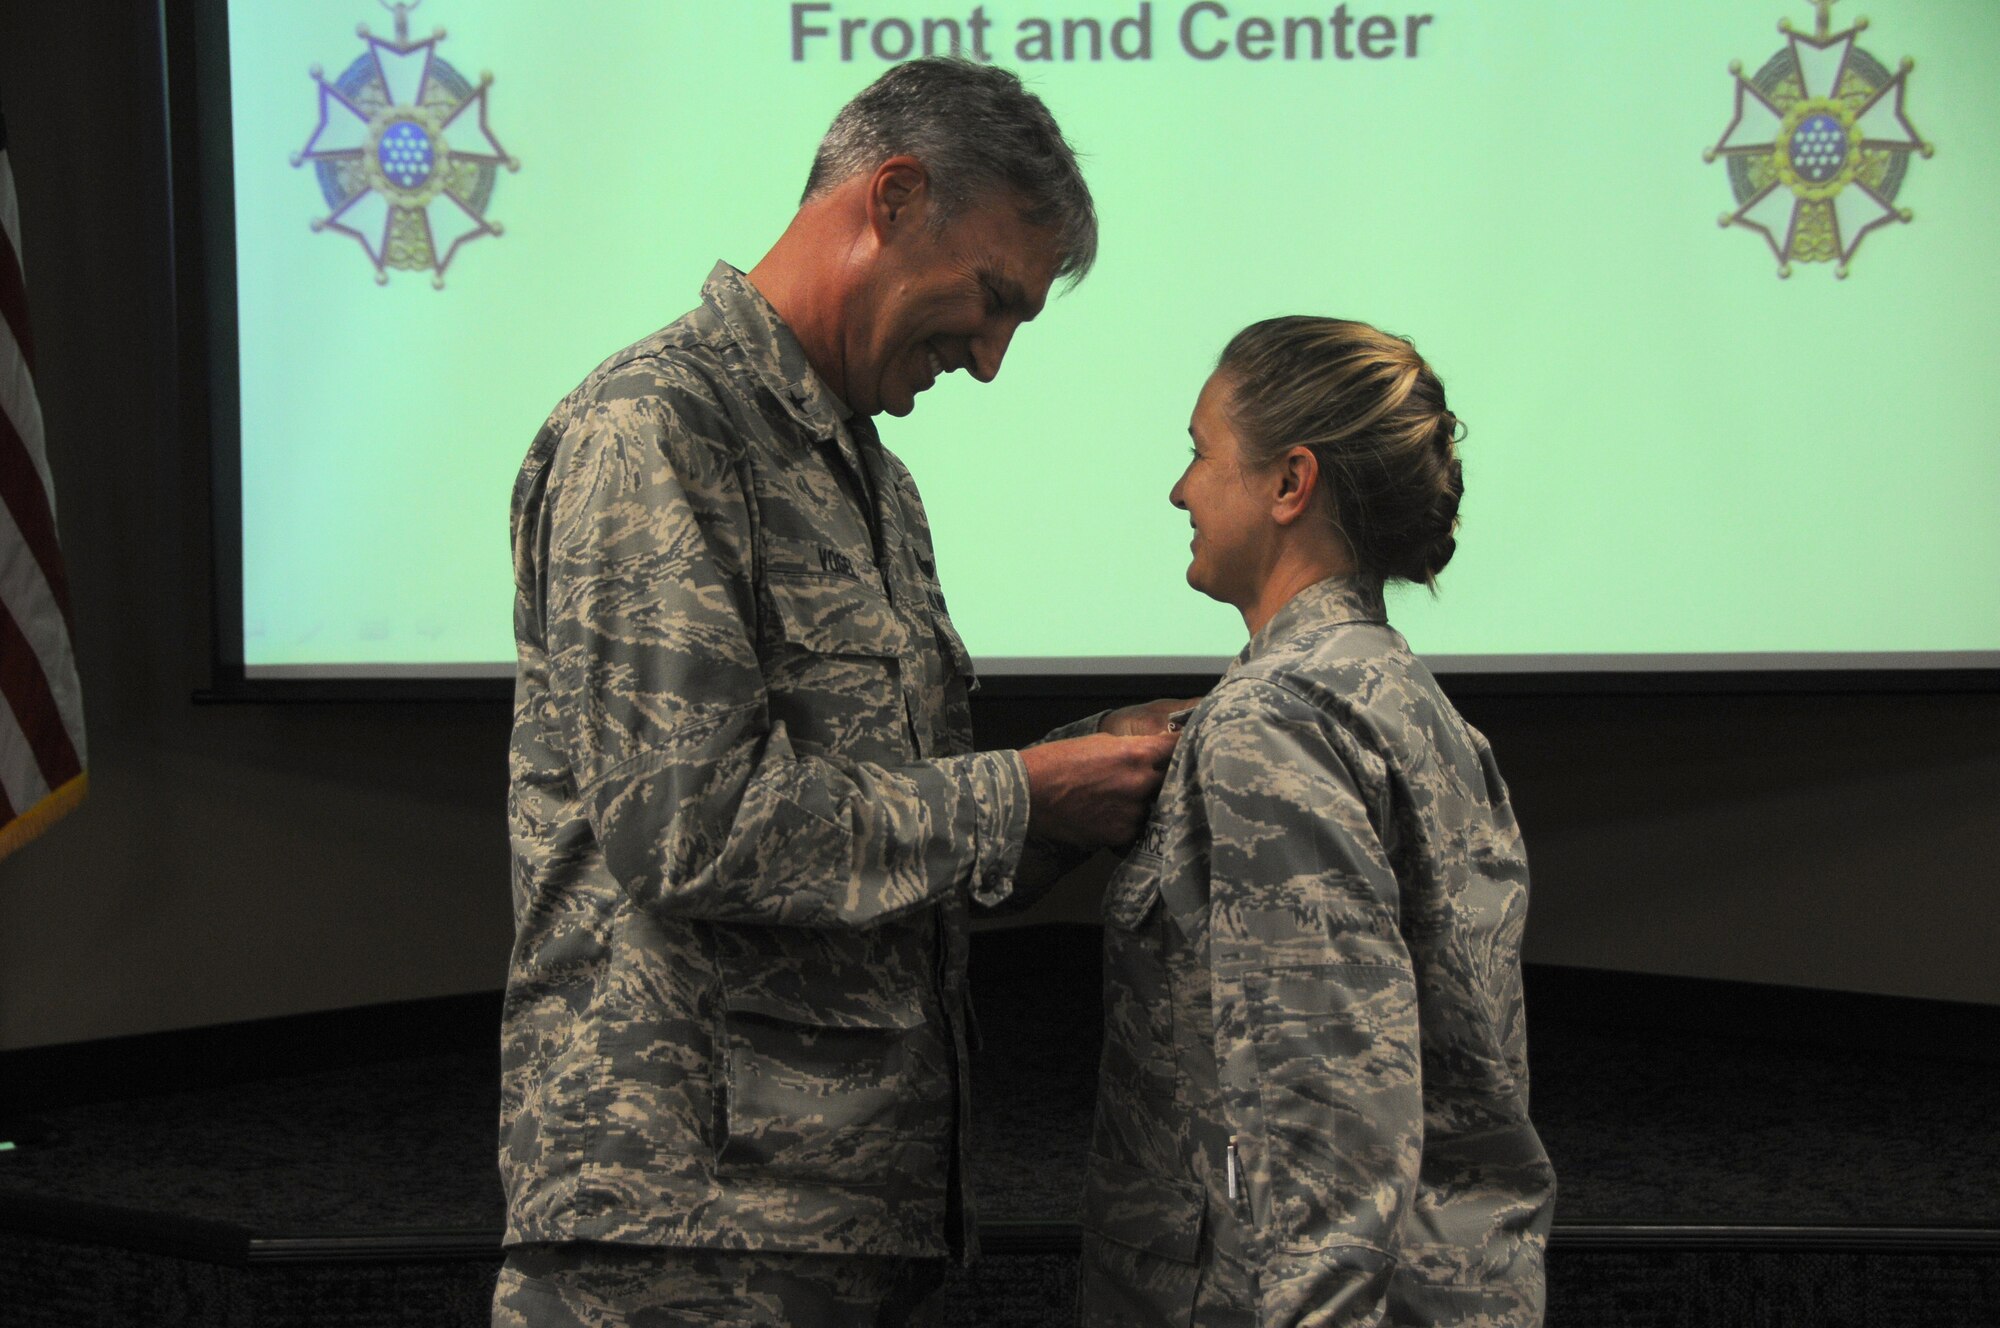 Brig. Gen. Kurt Vogel, Arkansas Air National Guard commander, presents Col. Bobbi Doorenbos, 188th Wing commander, with the Legion of Merit June 7, 2015 at Ebbing Air National Guard Base, Fort Smith, Ark. The award is to recognize Doorenbos for her achievements as the 214th Reconnaissance Group commander for the 162nd Wing in Arizona. (U.S. Air National Guard photo by Senior Airman Cody Martin/Released)